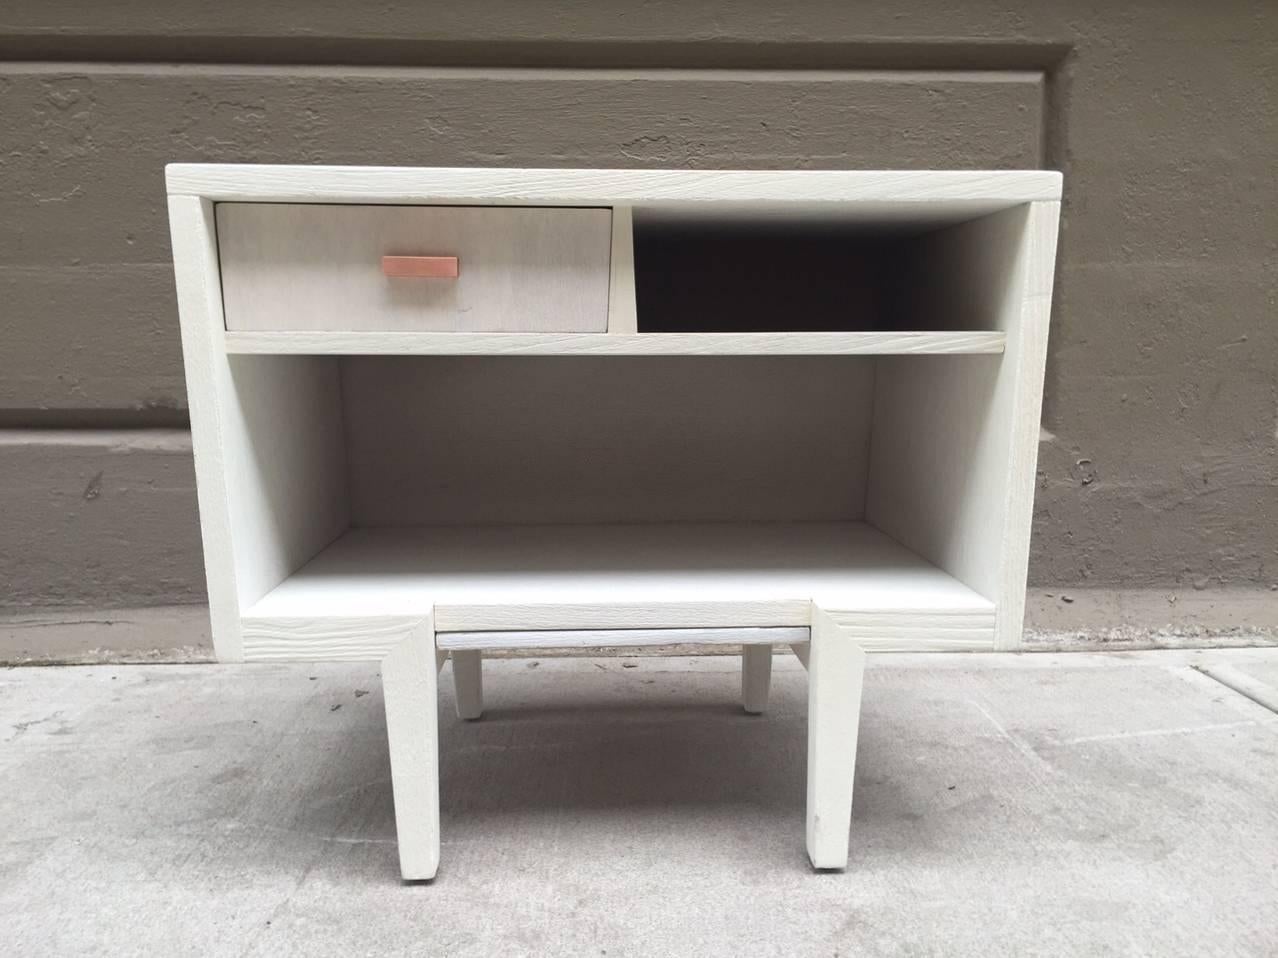 Pair of Italian painted nightstands style of Gio Ponti. Wood nightstands are painted white with an exposed grain finish. Has a single pullout drawer with copper hardware and a pullout tray at the bottom. Mid Century Modern.